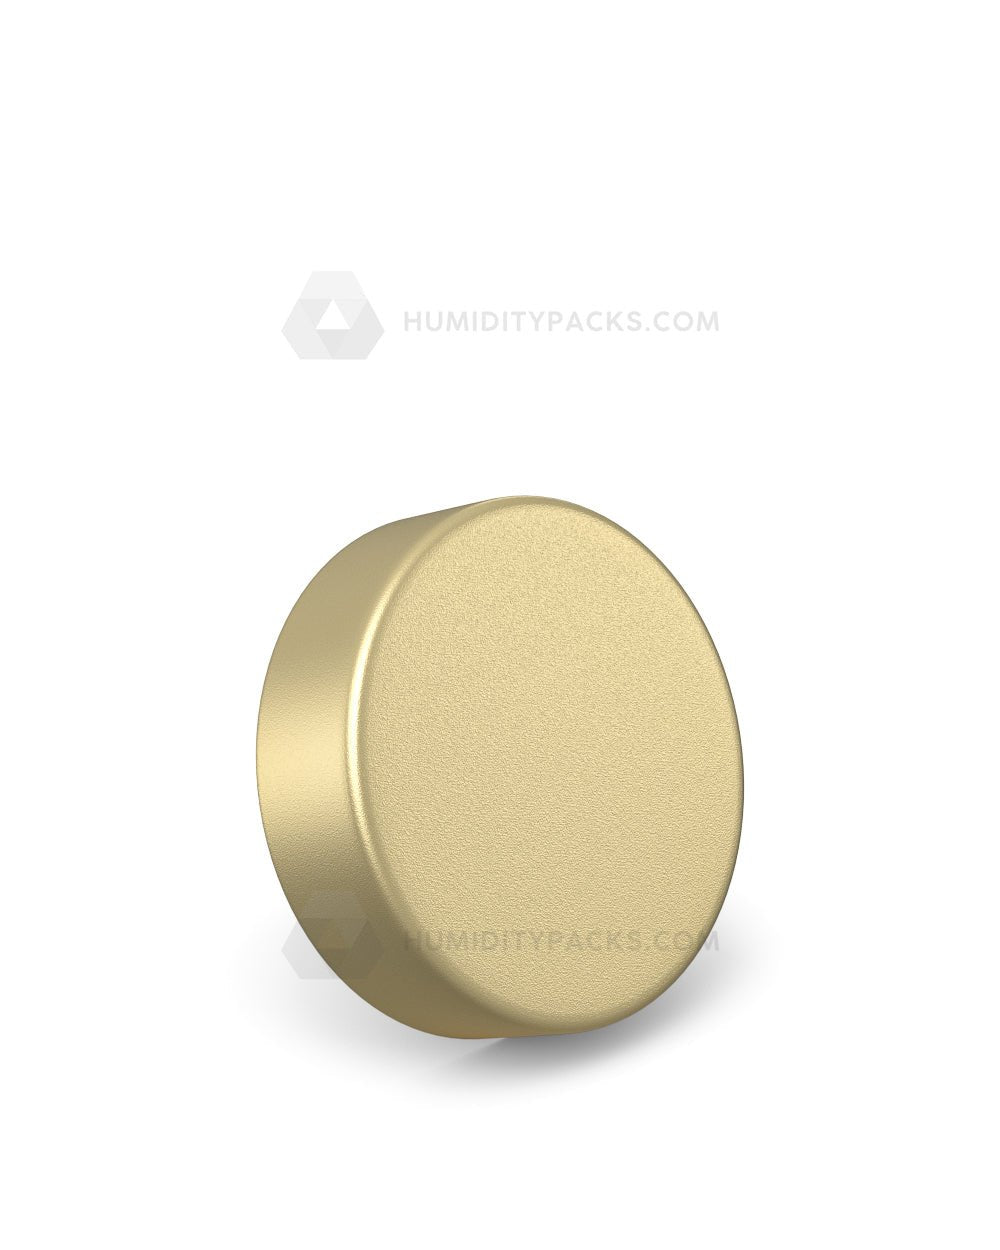 50mm Push and Turn Smooth Child Resistant Plastic Caps With Foam Liner - Matte Gold - 100/Box Humidity Packs - 1